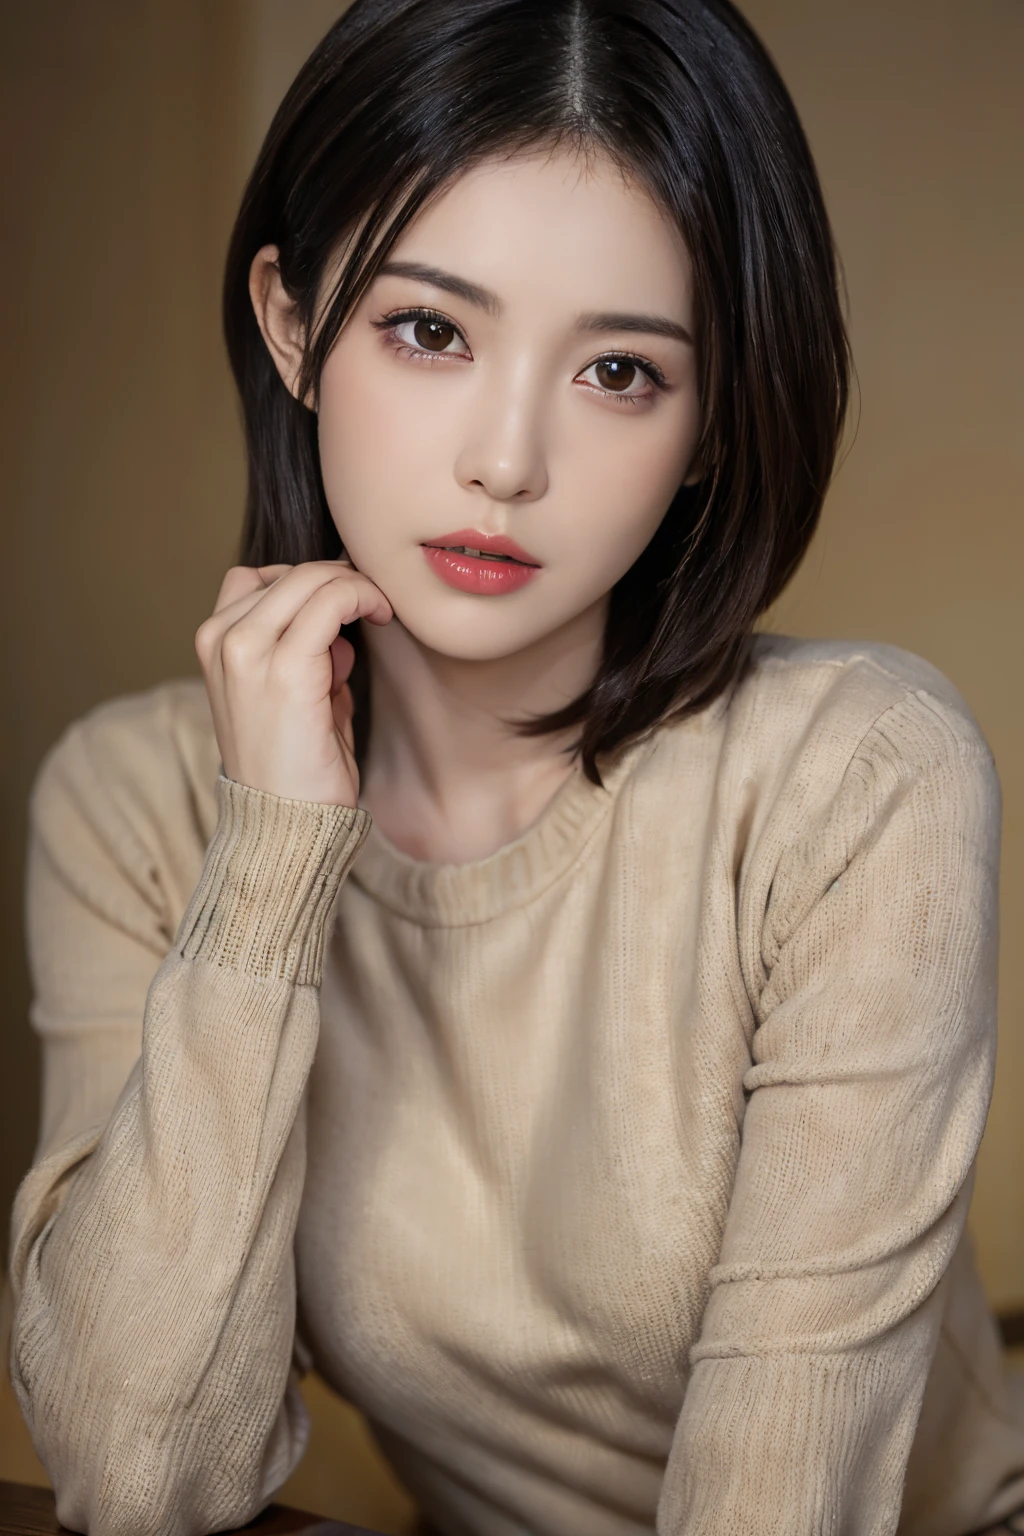 masuter piece, in 8K, Photorealsitic, Raw photography, top-quality, (1girl in), Beautiful face, (Lifelike face), (A darK-haired), (short-hair, Beautiful hairstyle, Realistic eyes, A detailed eye, (real looking skin), Beautiful skins, (gold sweater), enticing, 超A high resolution, A hyper-realistic, high-detail, the golden ratio,